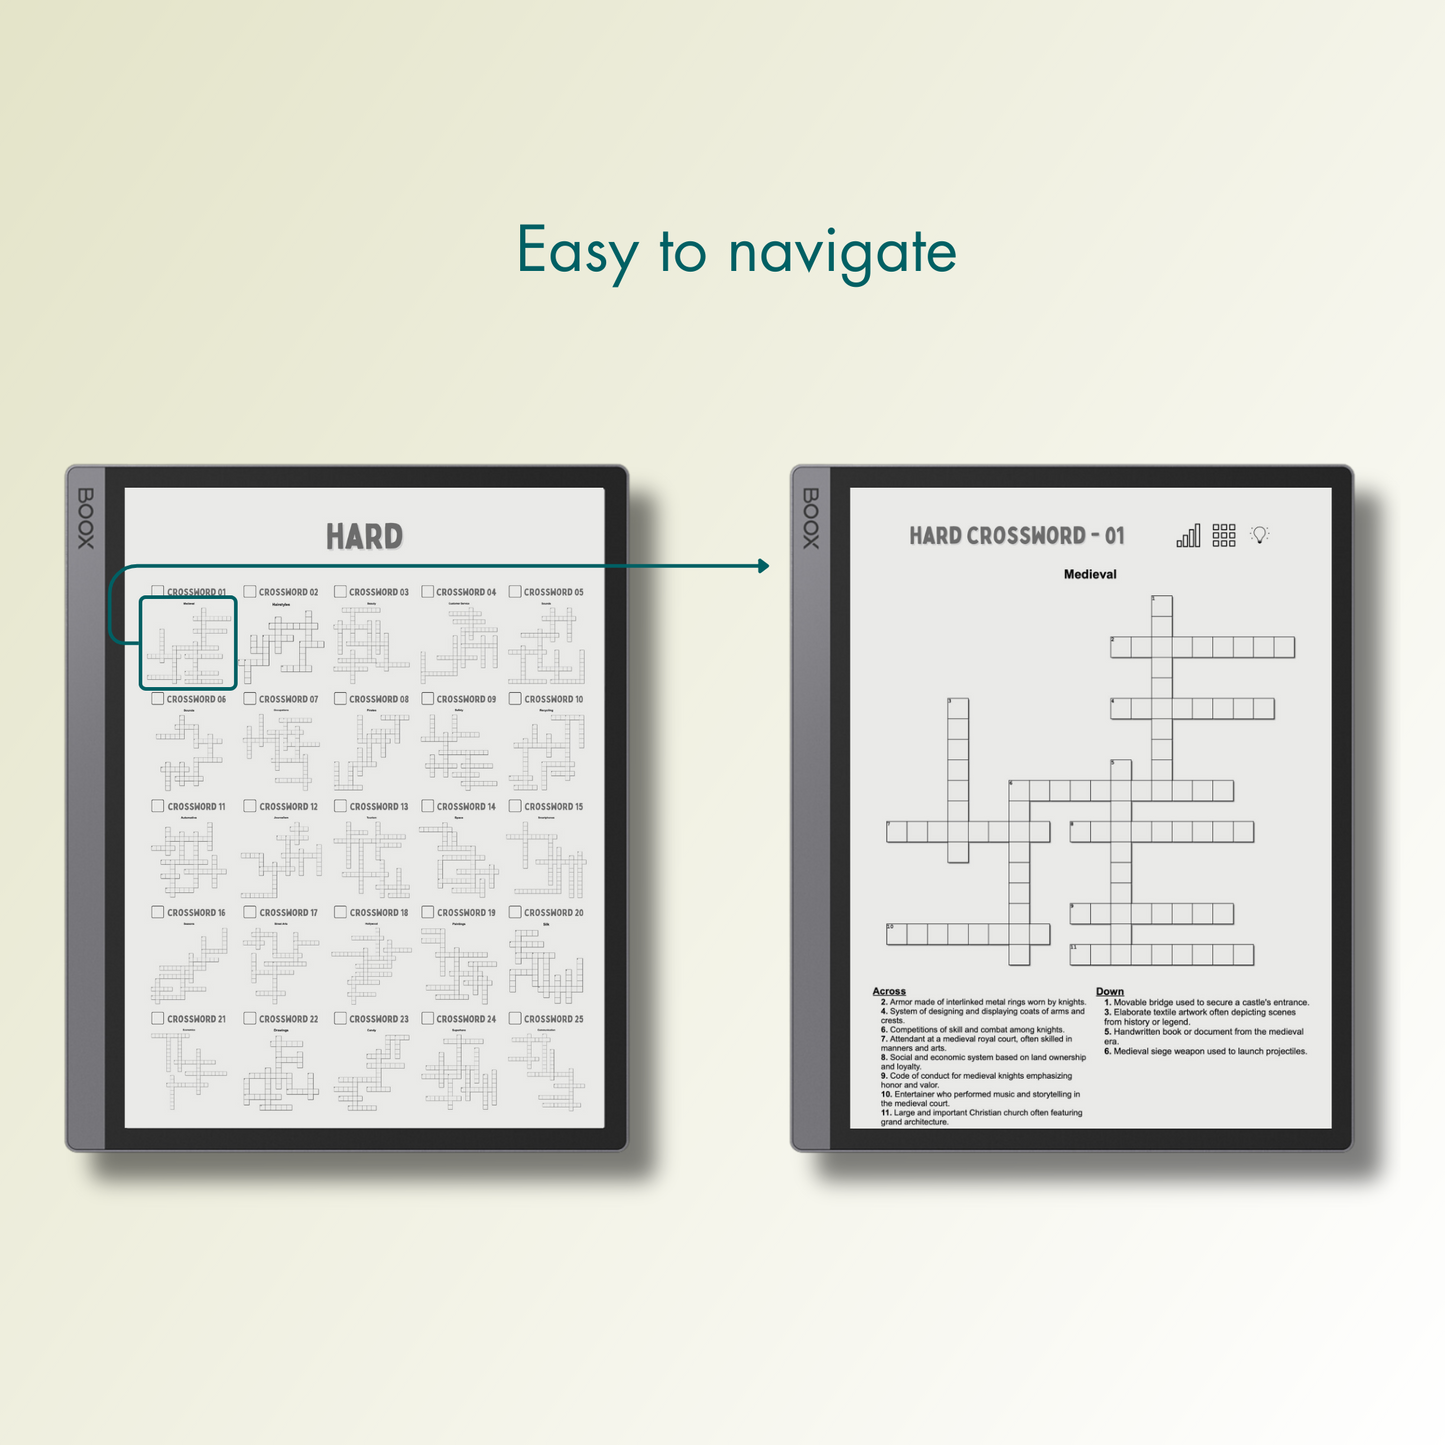 Onyx Boox Crossword Puzzles with easy navigations.